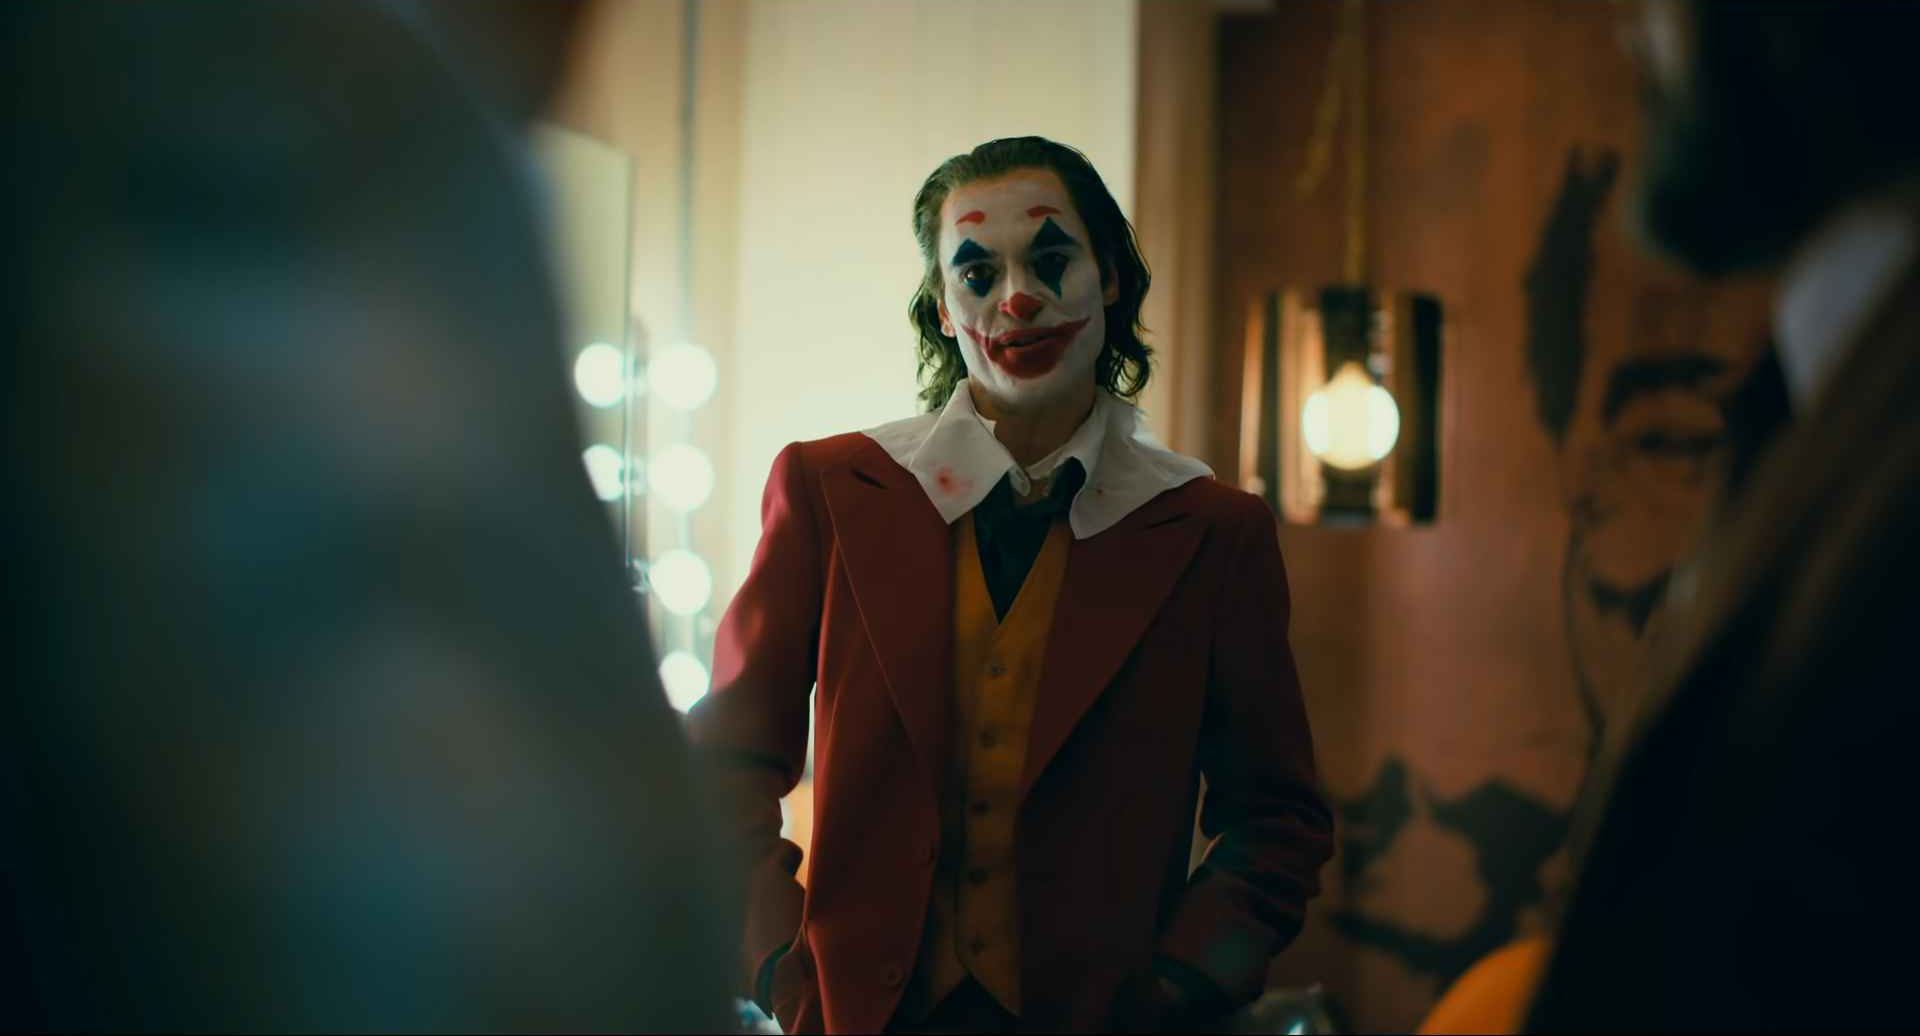 What To Expect From Joker 2?